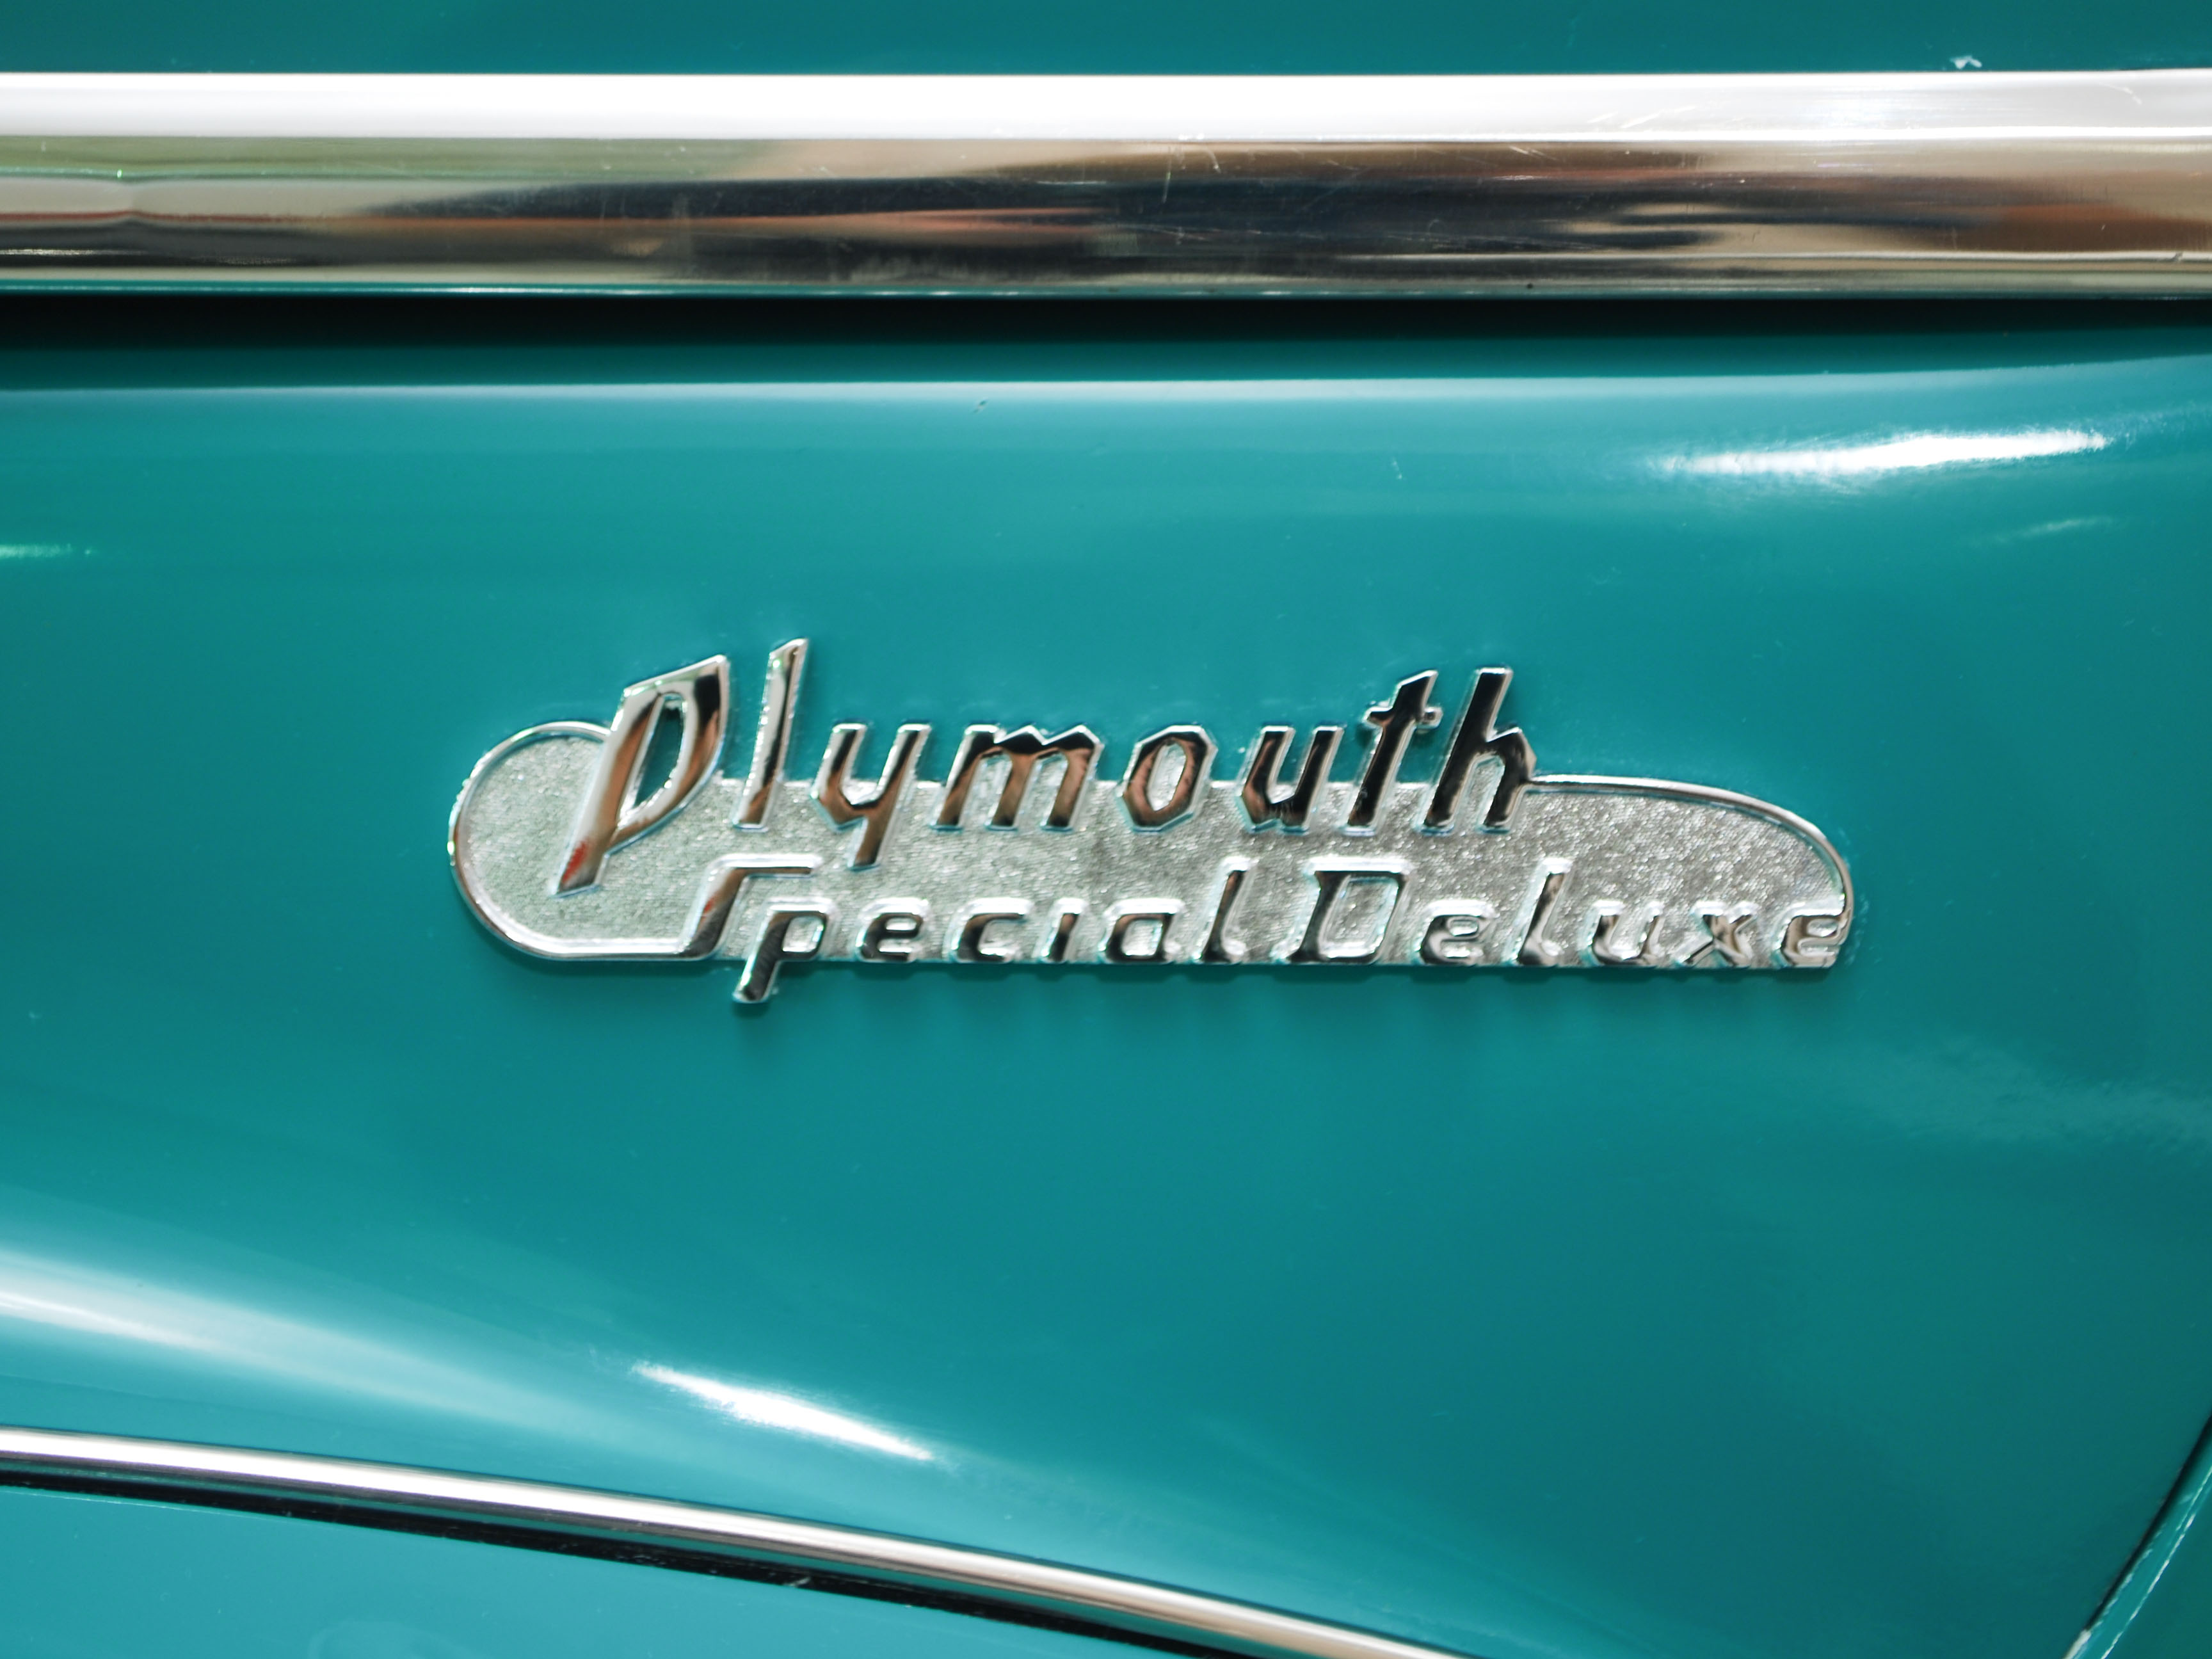 1941 plymouth p11d deluxe